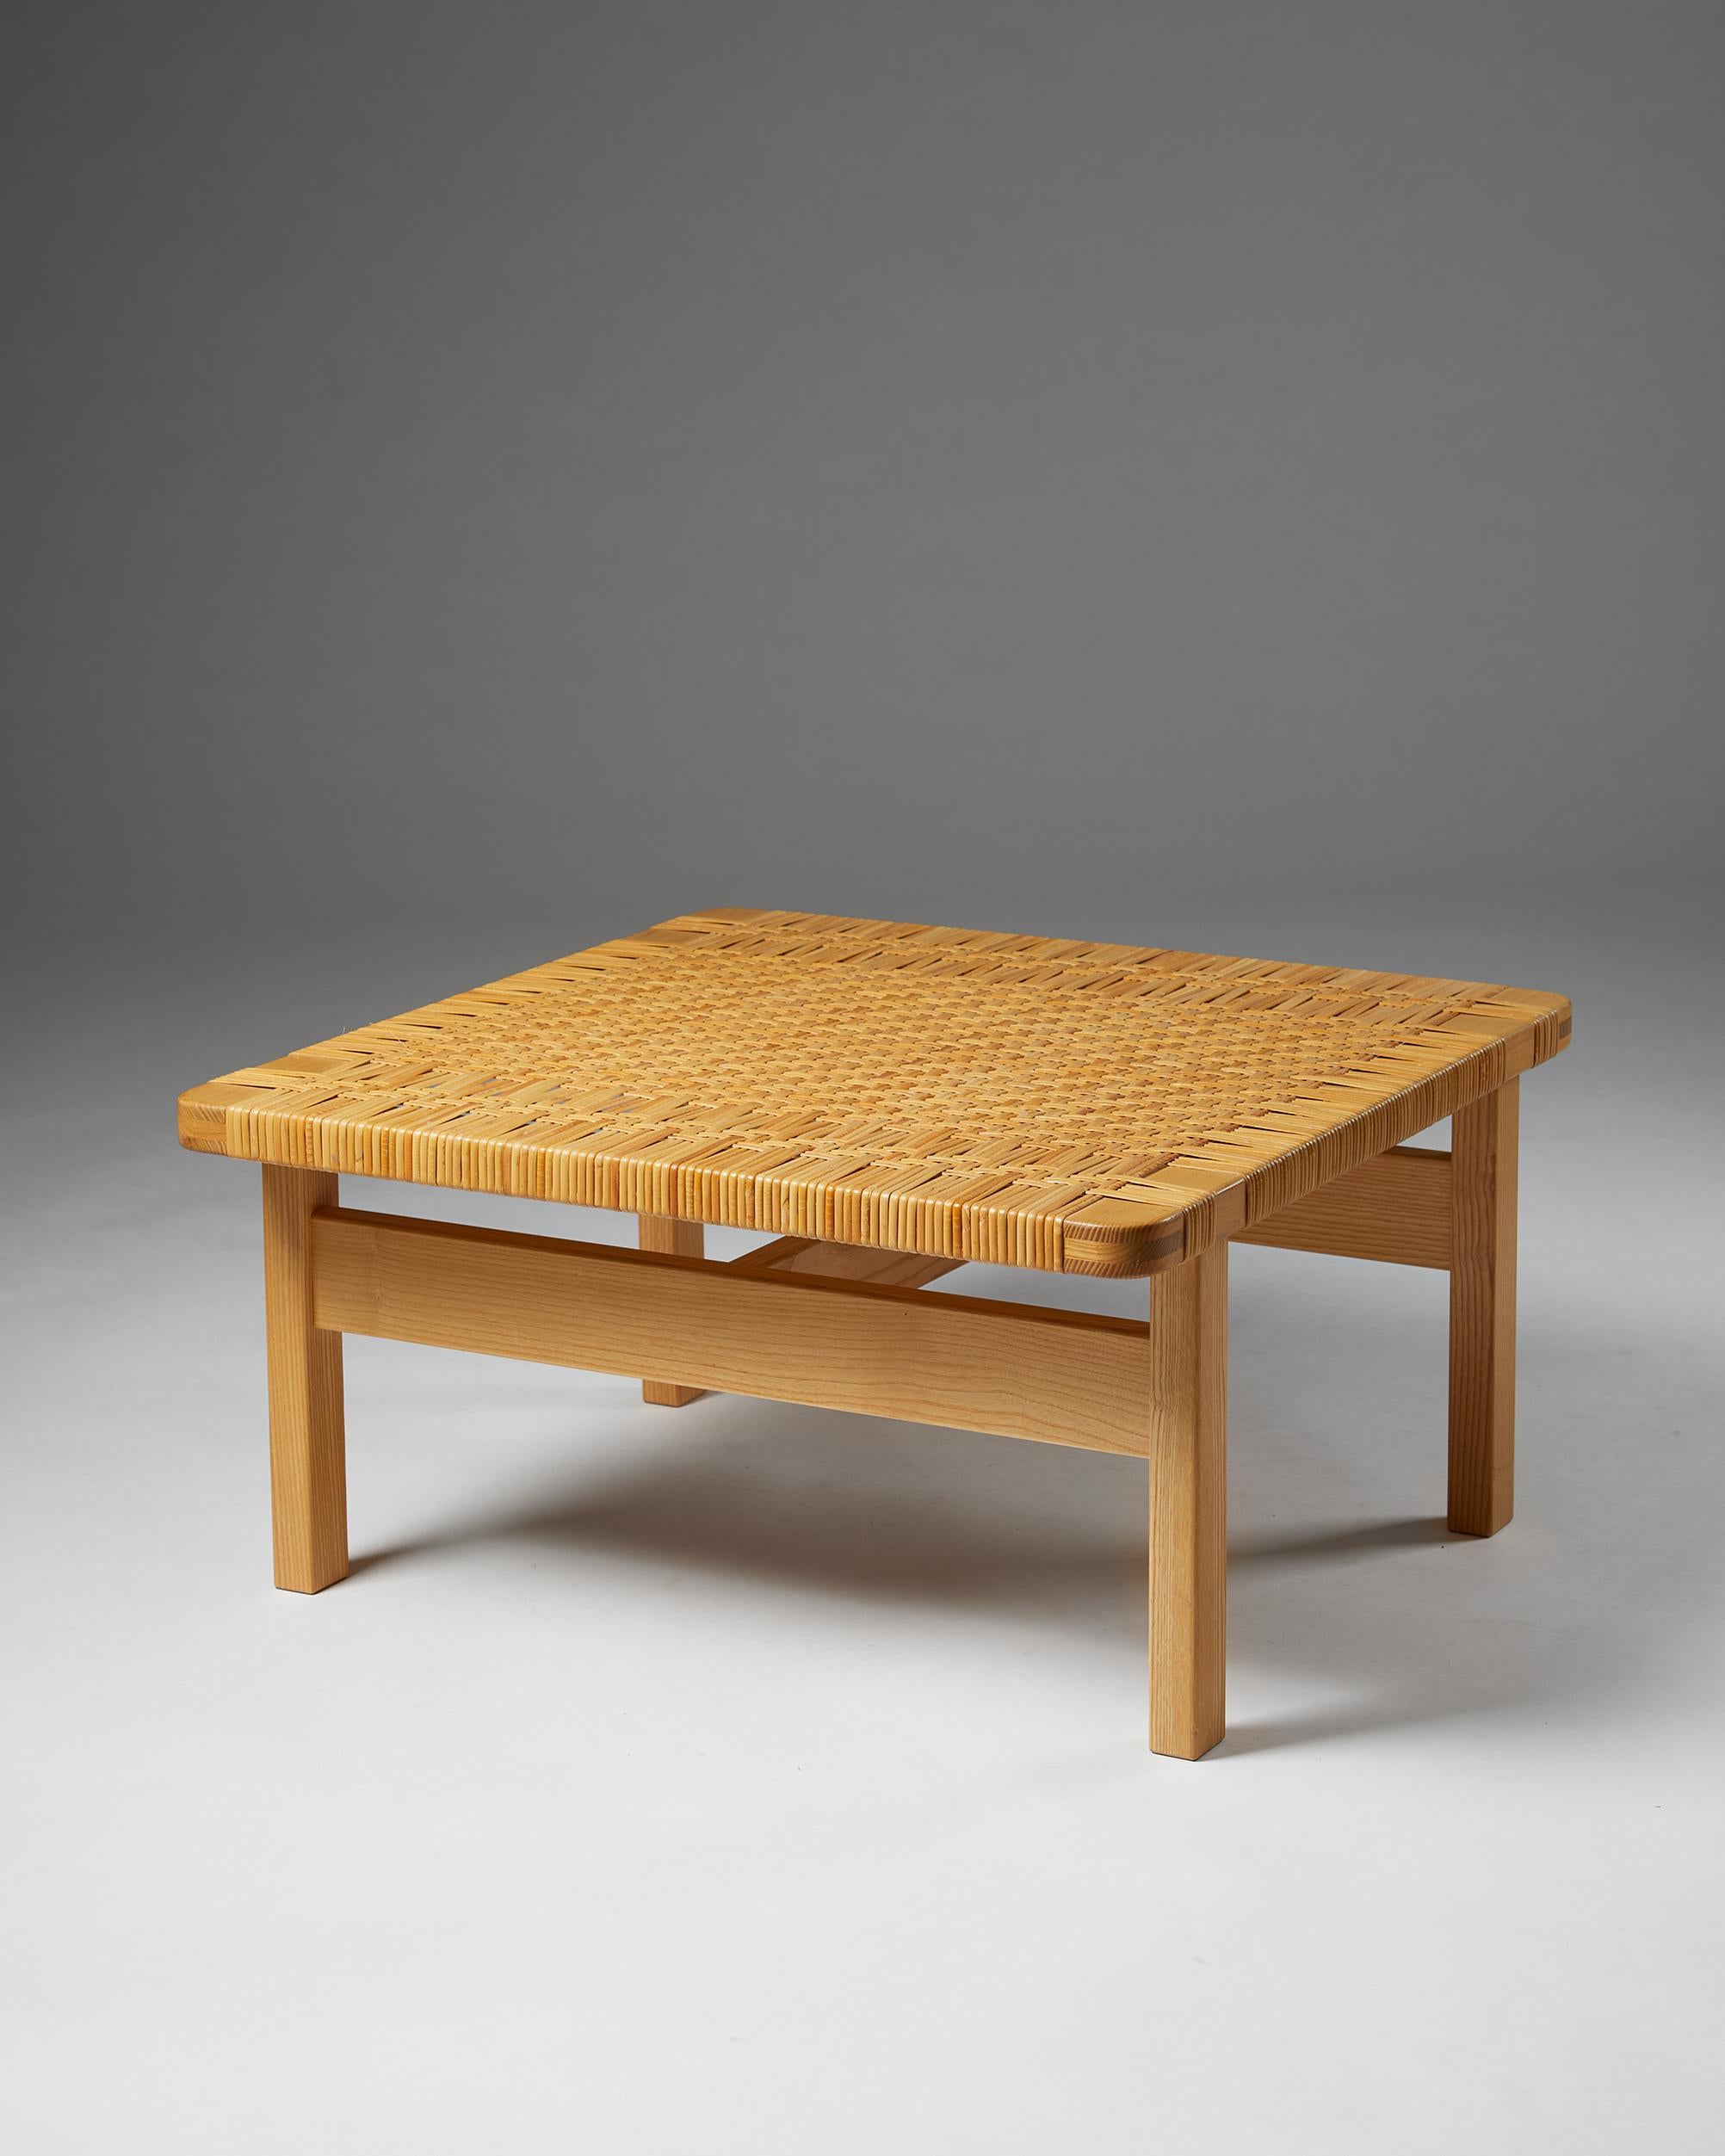 Occasional table/ Bench model 5274, designed by Börge Mogensen for Fredericia Stolefabrik,
Denmark. 1950's.

Oak and cane.

Measurements:
W: 69 cm/ 27